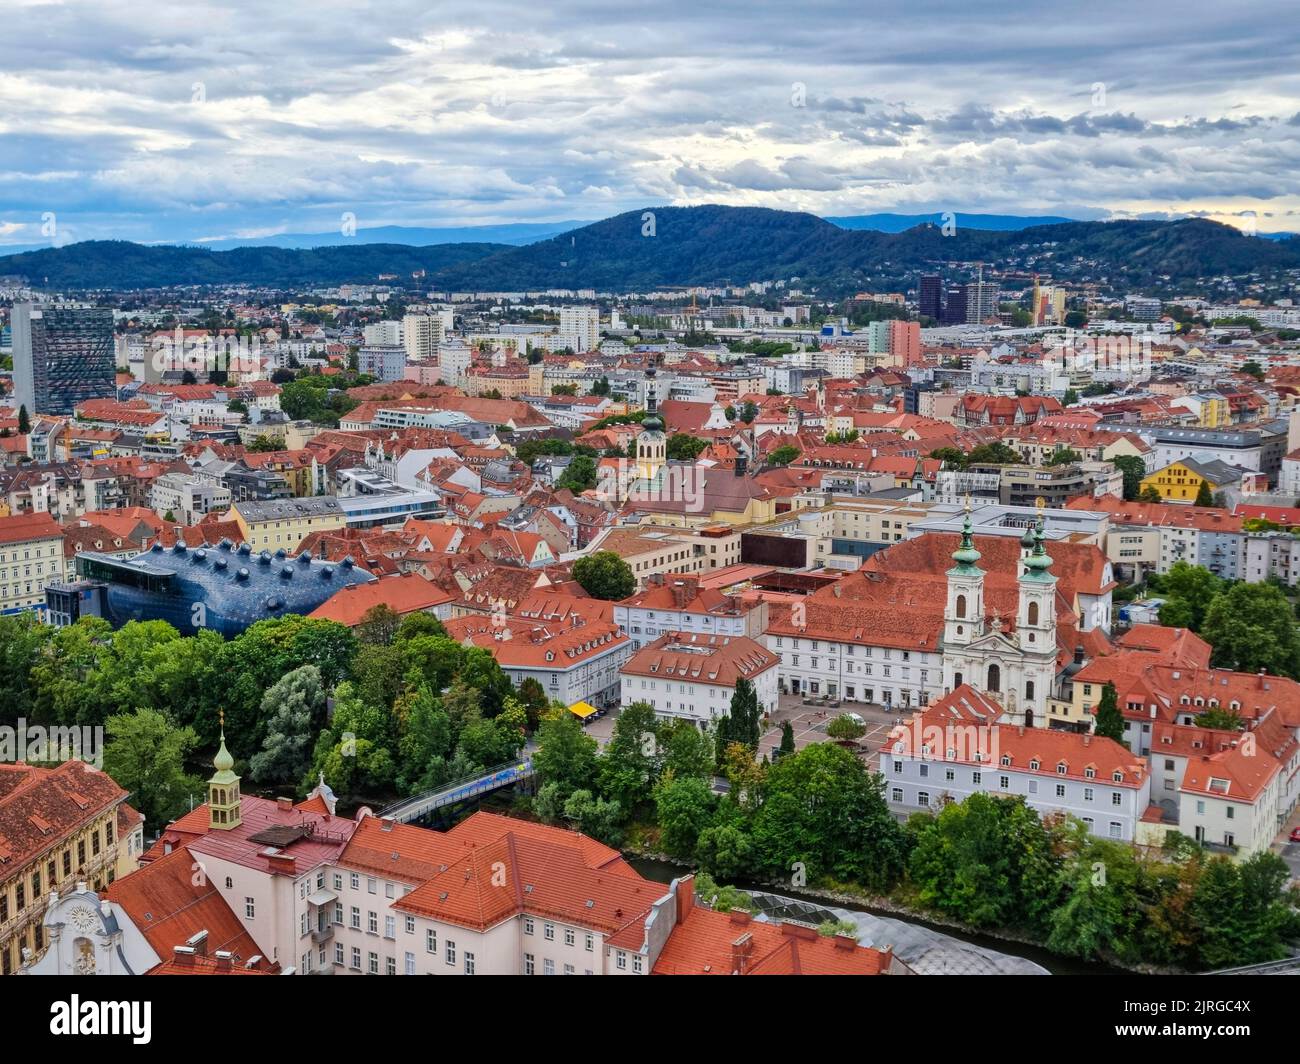 Beautiful view over the old city center of Graz, with Mariahilfer church and historic buildings, in Styria region, Austria Stock Photo